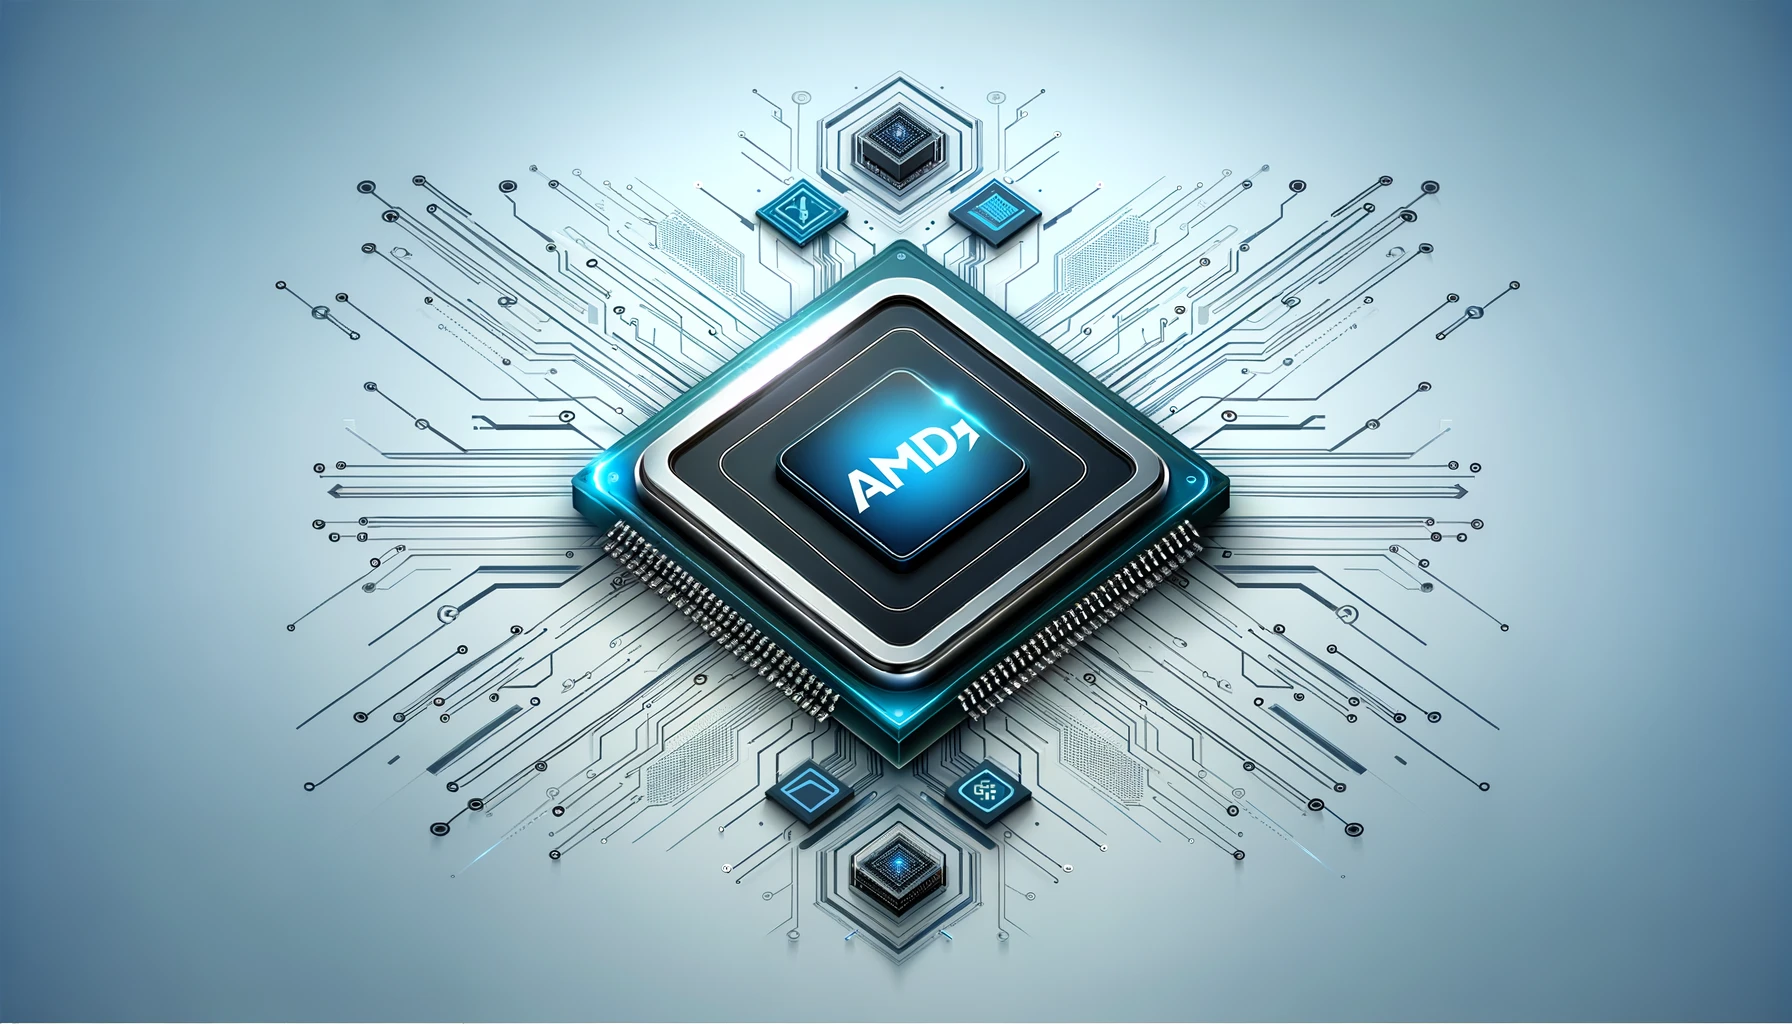 Samsung Earns AMD’s Approval for MI300 A.I. Processors